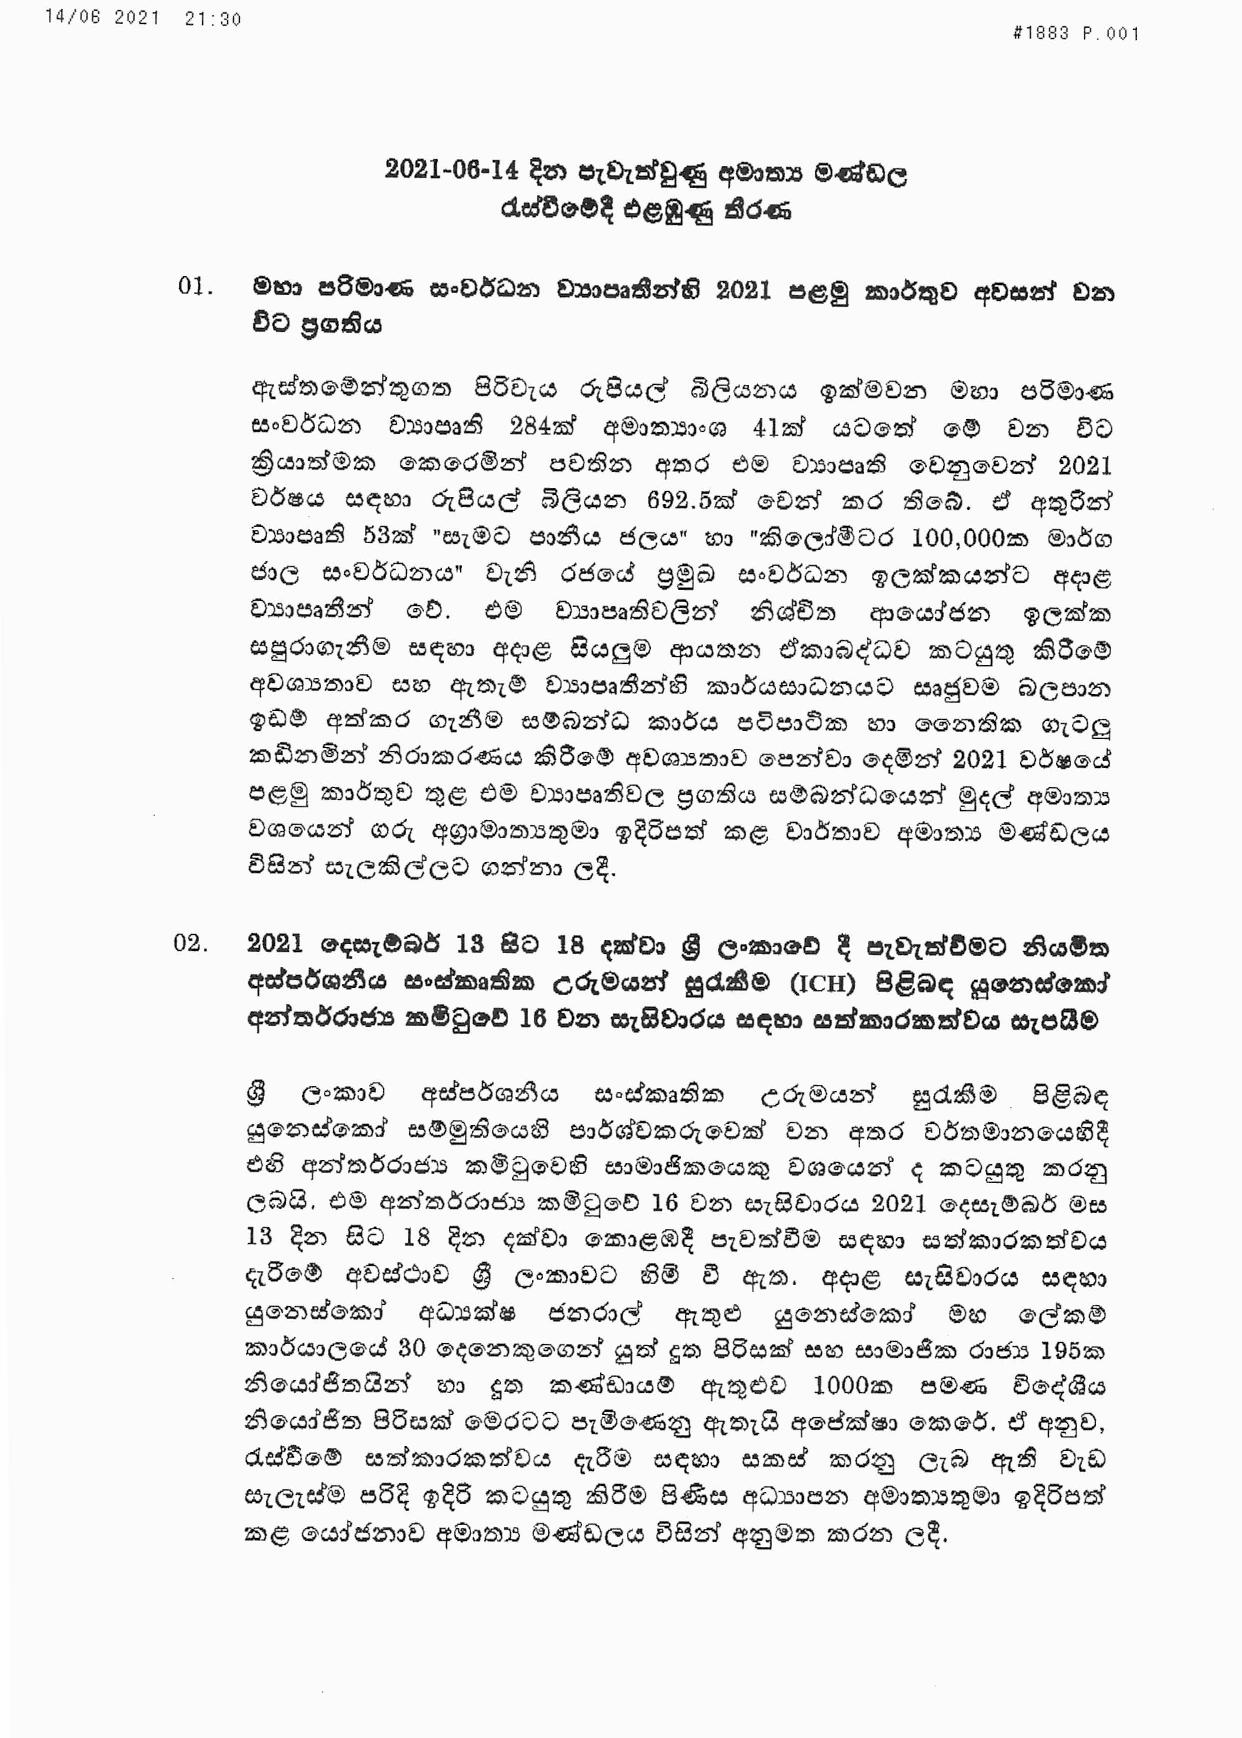 Cabinet Decisions on 14.06.2021 page 001